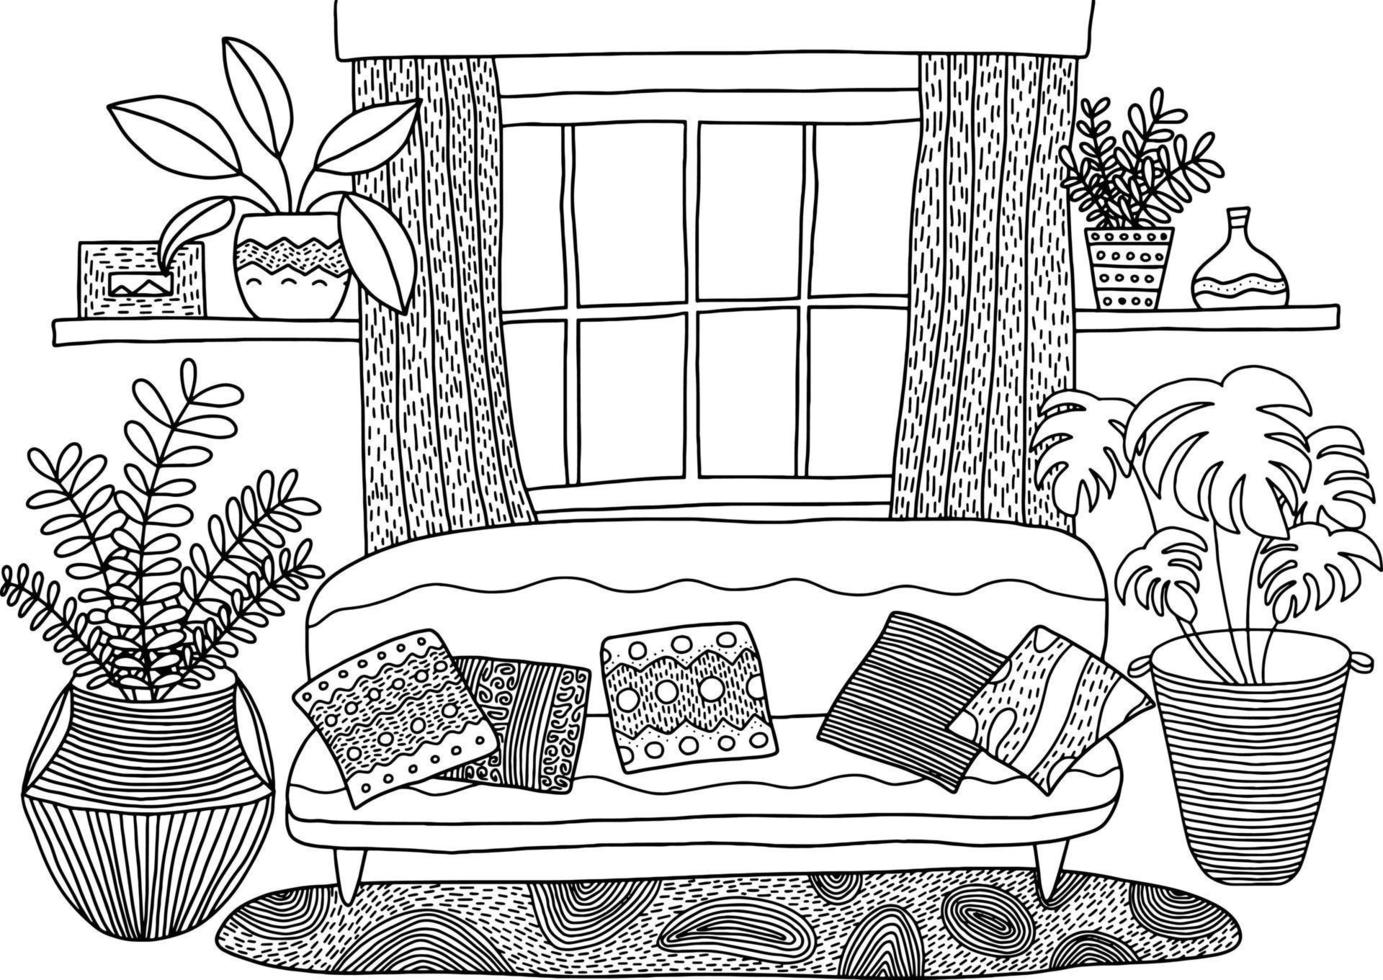 Cozy Living Room Coloring Page Interior Design Cute Book For Children And S 15805839 Vector Art At Vecy